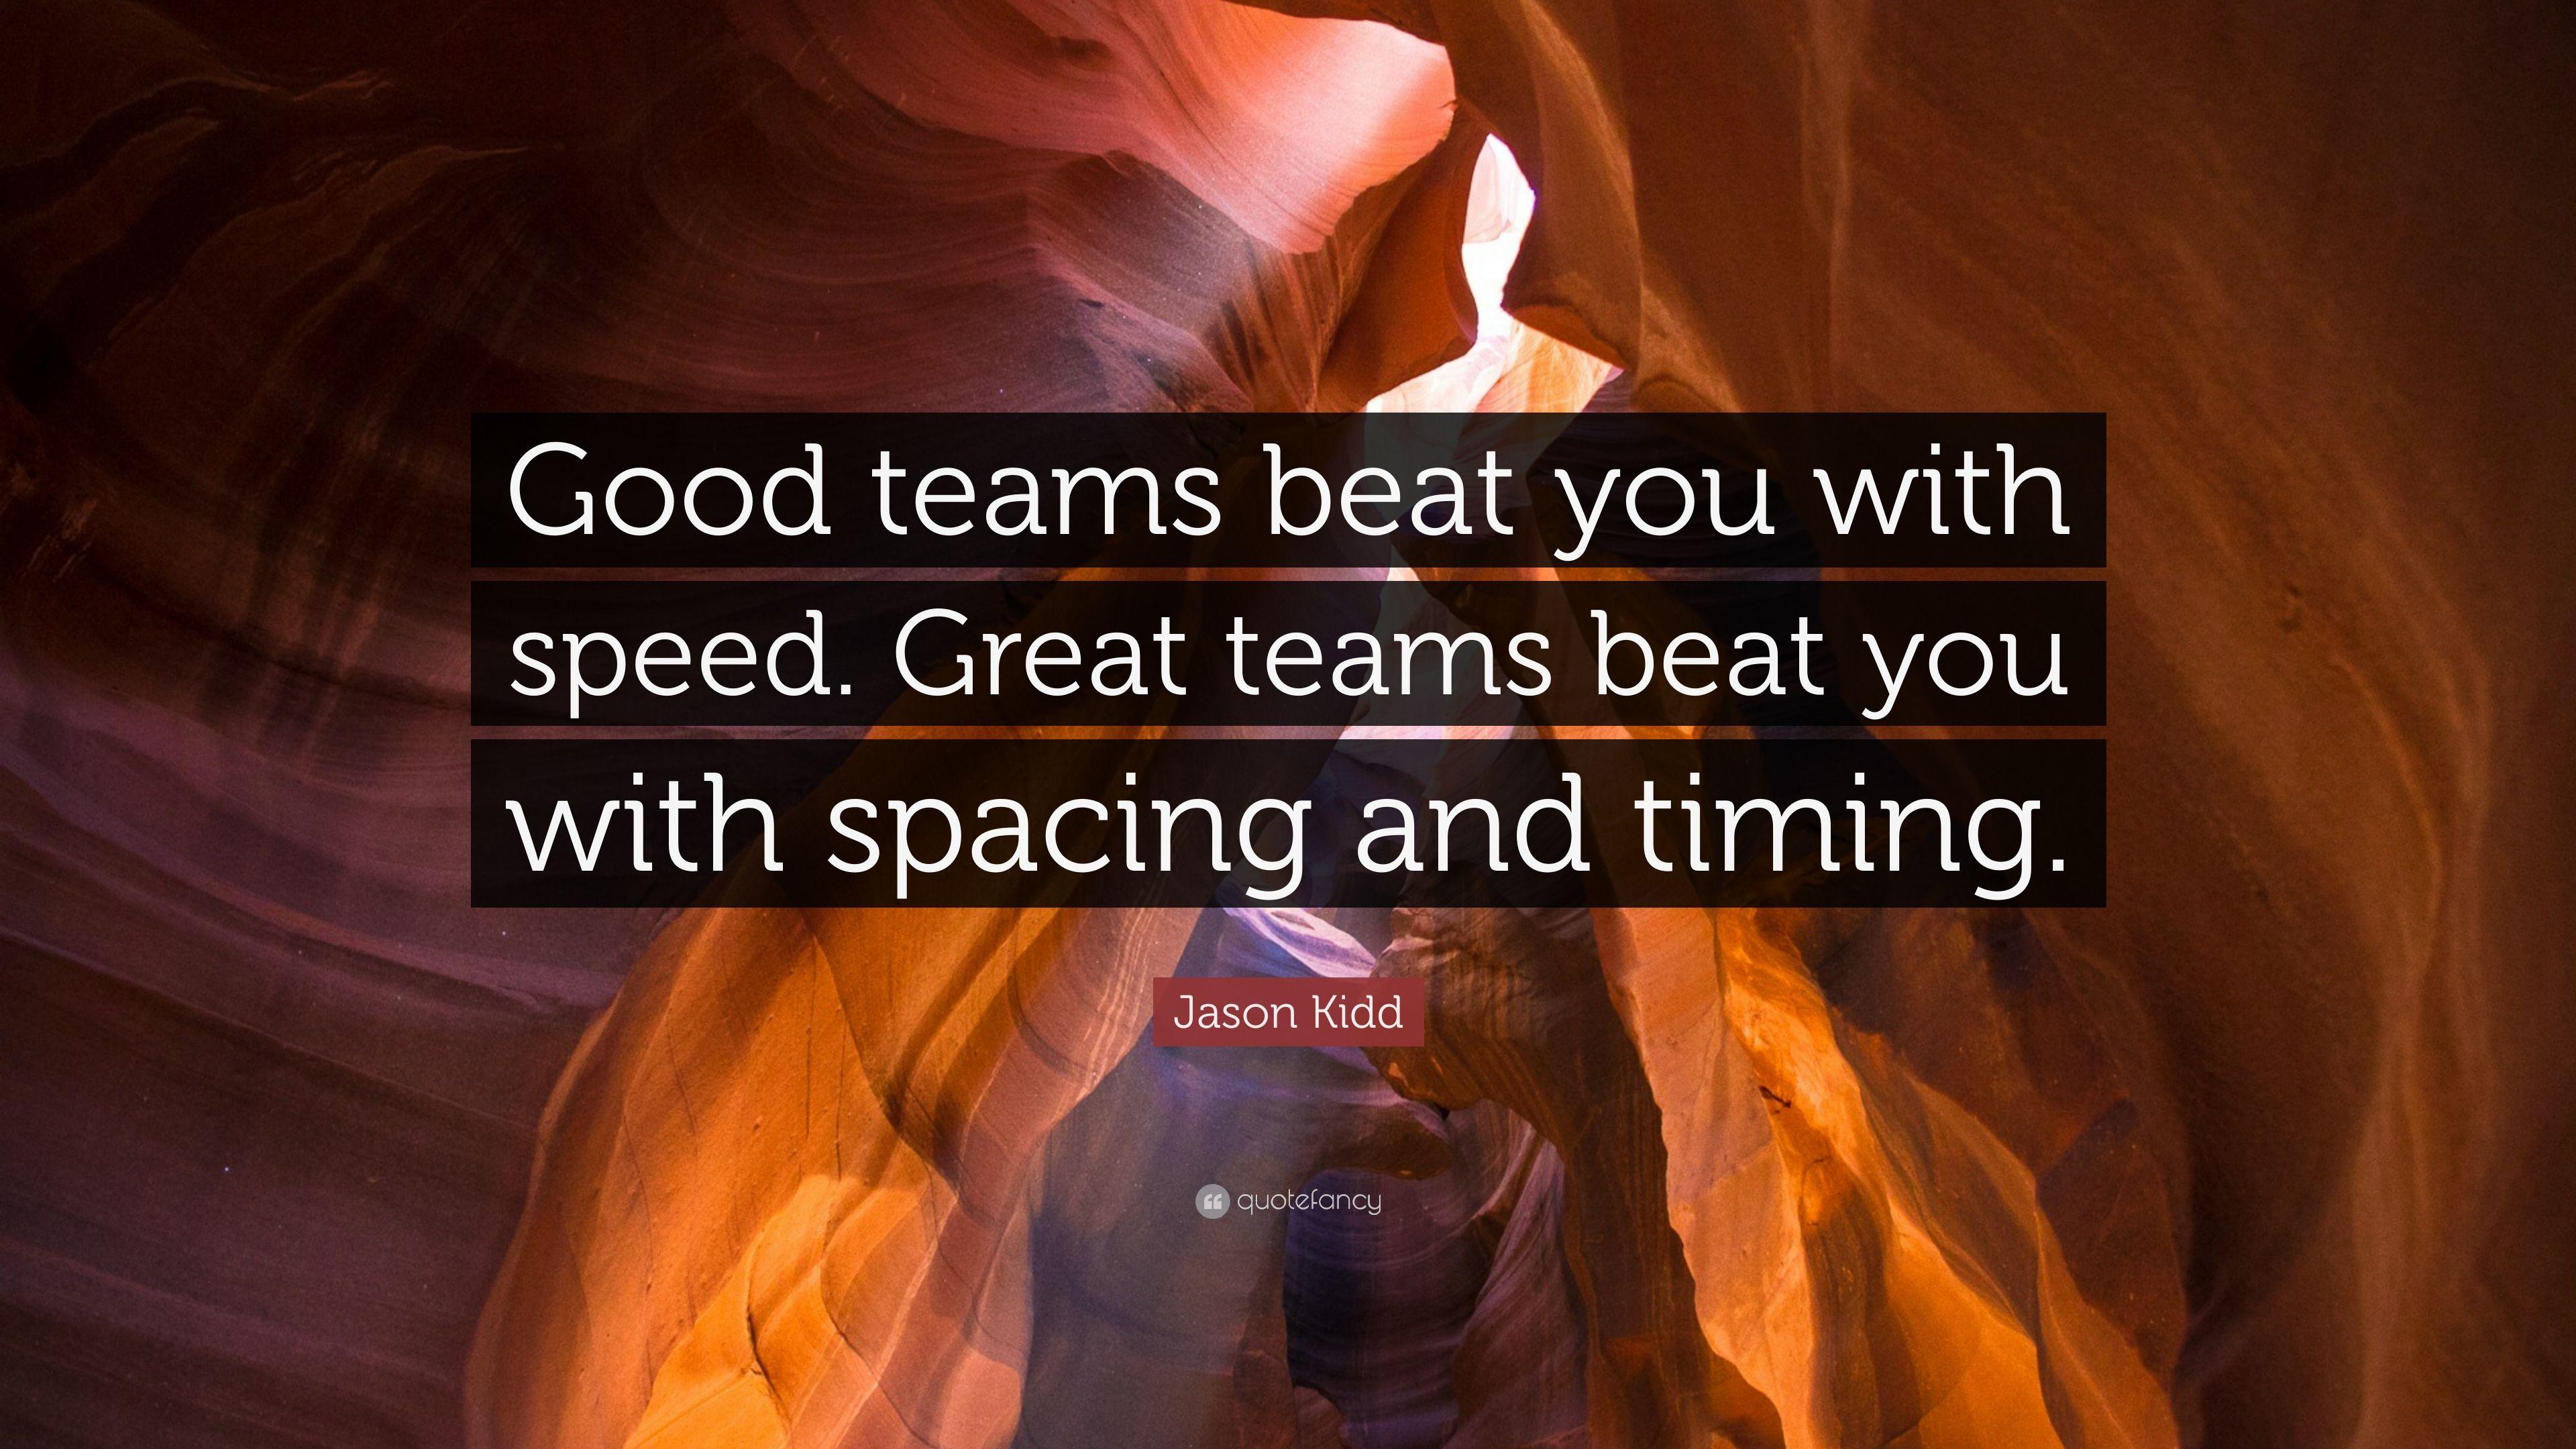 Jason Kidd Quote: “Good teams beat you with speed. Great teams beat